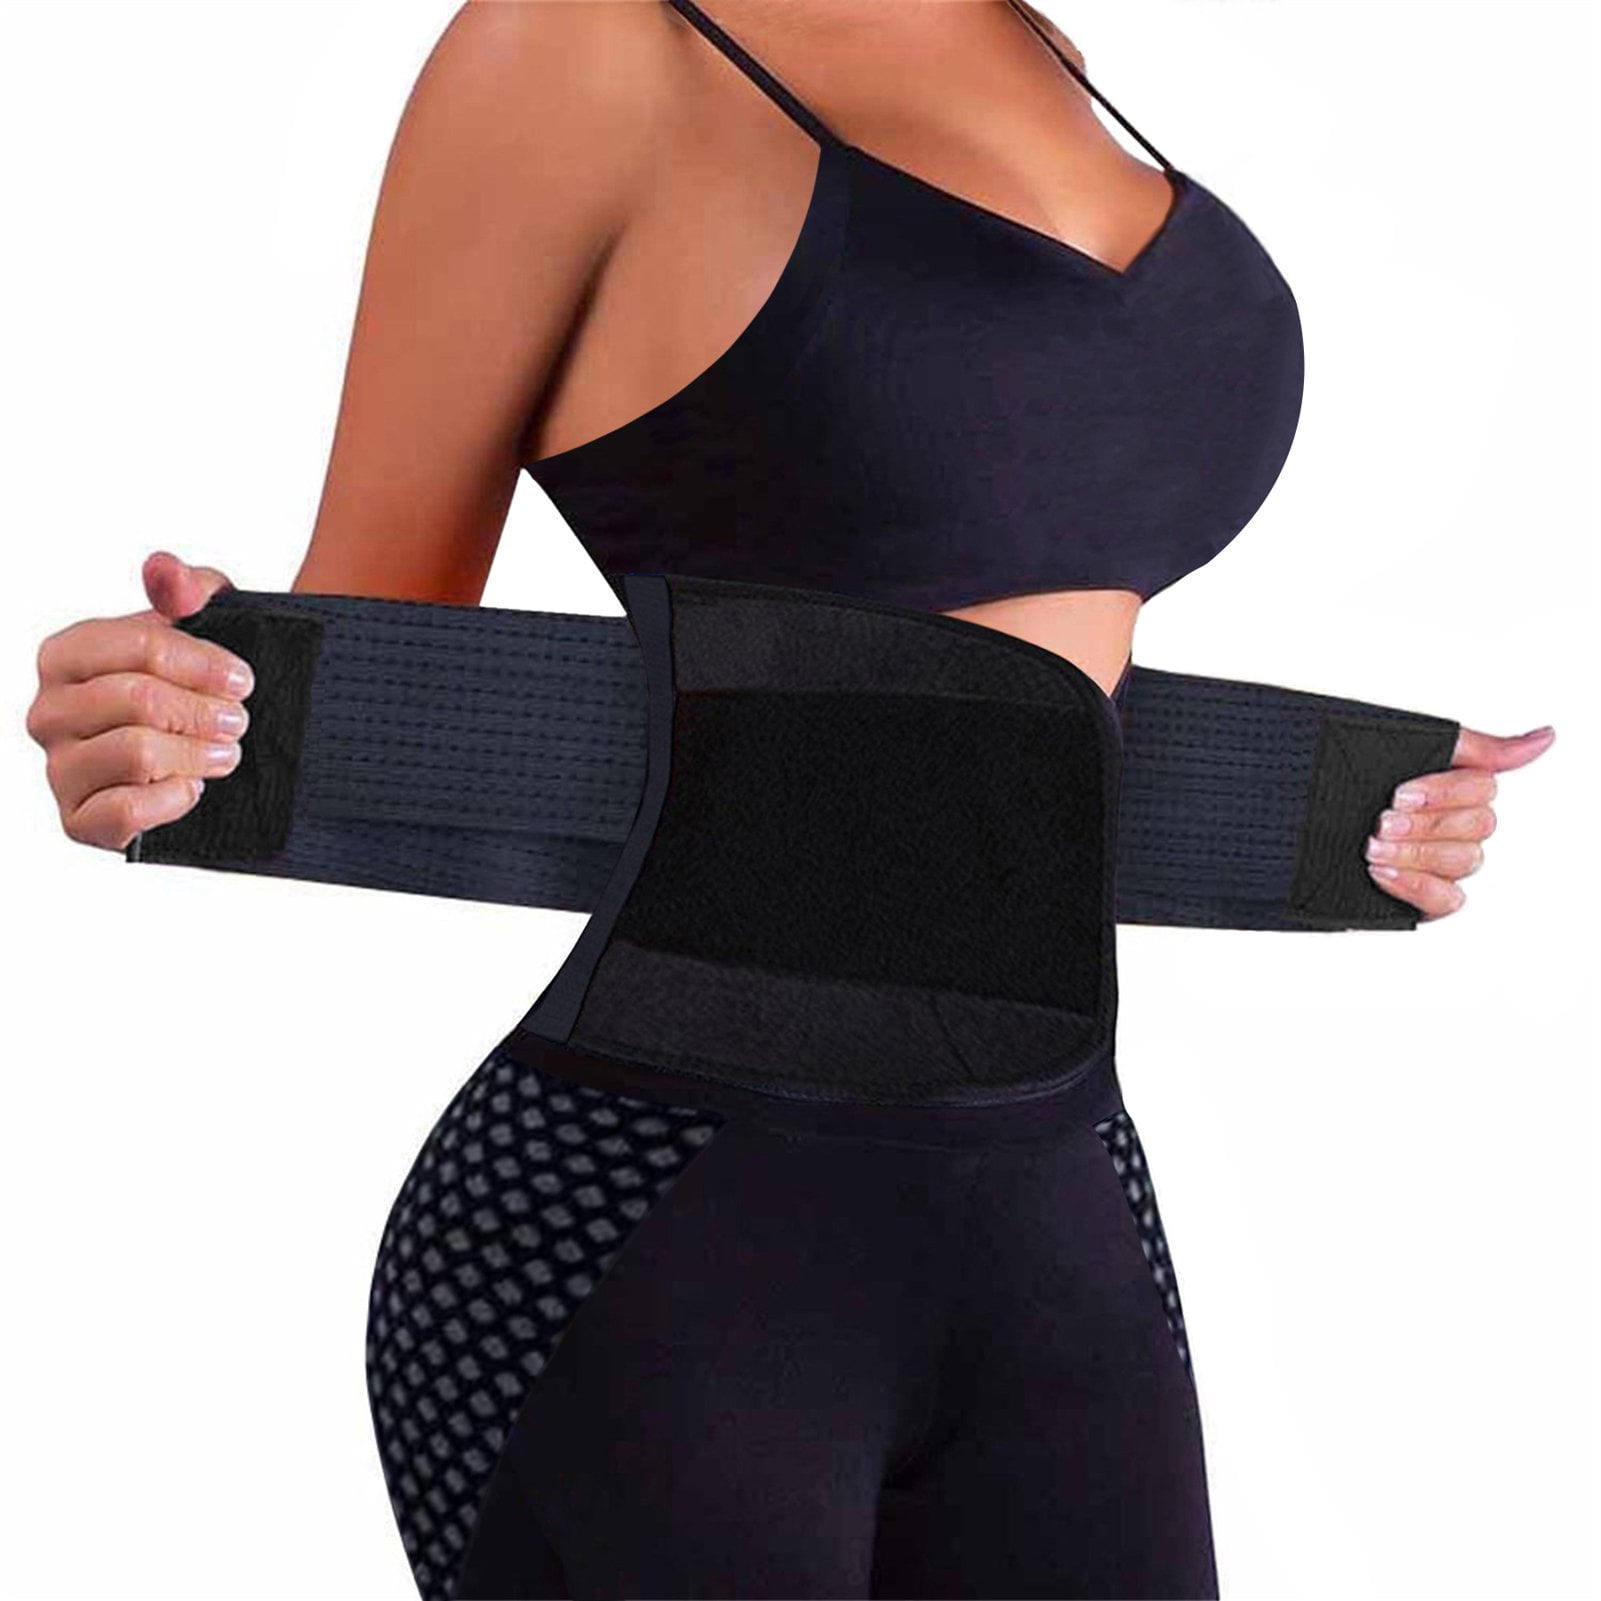 Sauna Sweat Band Hot Waist Trainer Modeling Strap Slimming Belt Weight Loss  Fat Burning Body Shaper – the best products in the Joom Geek online store